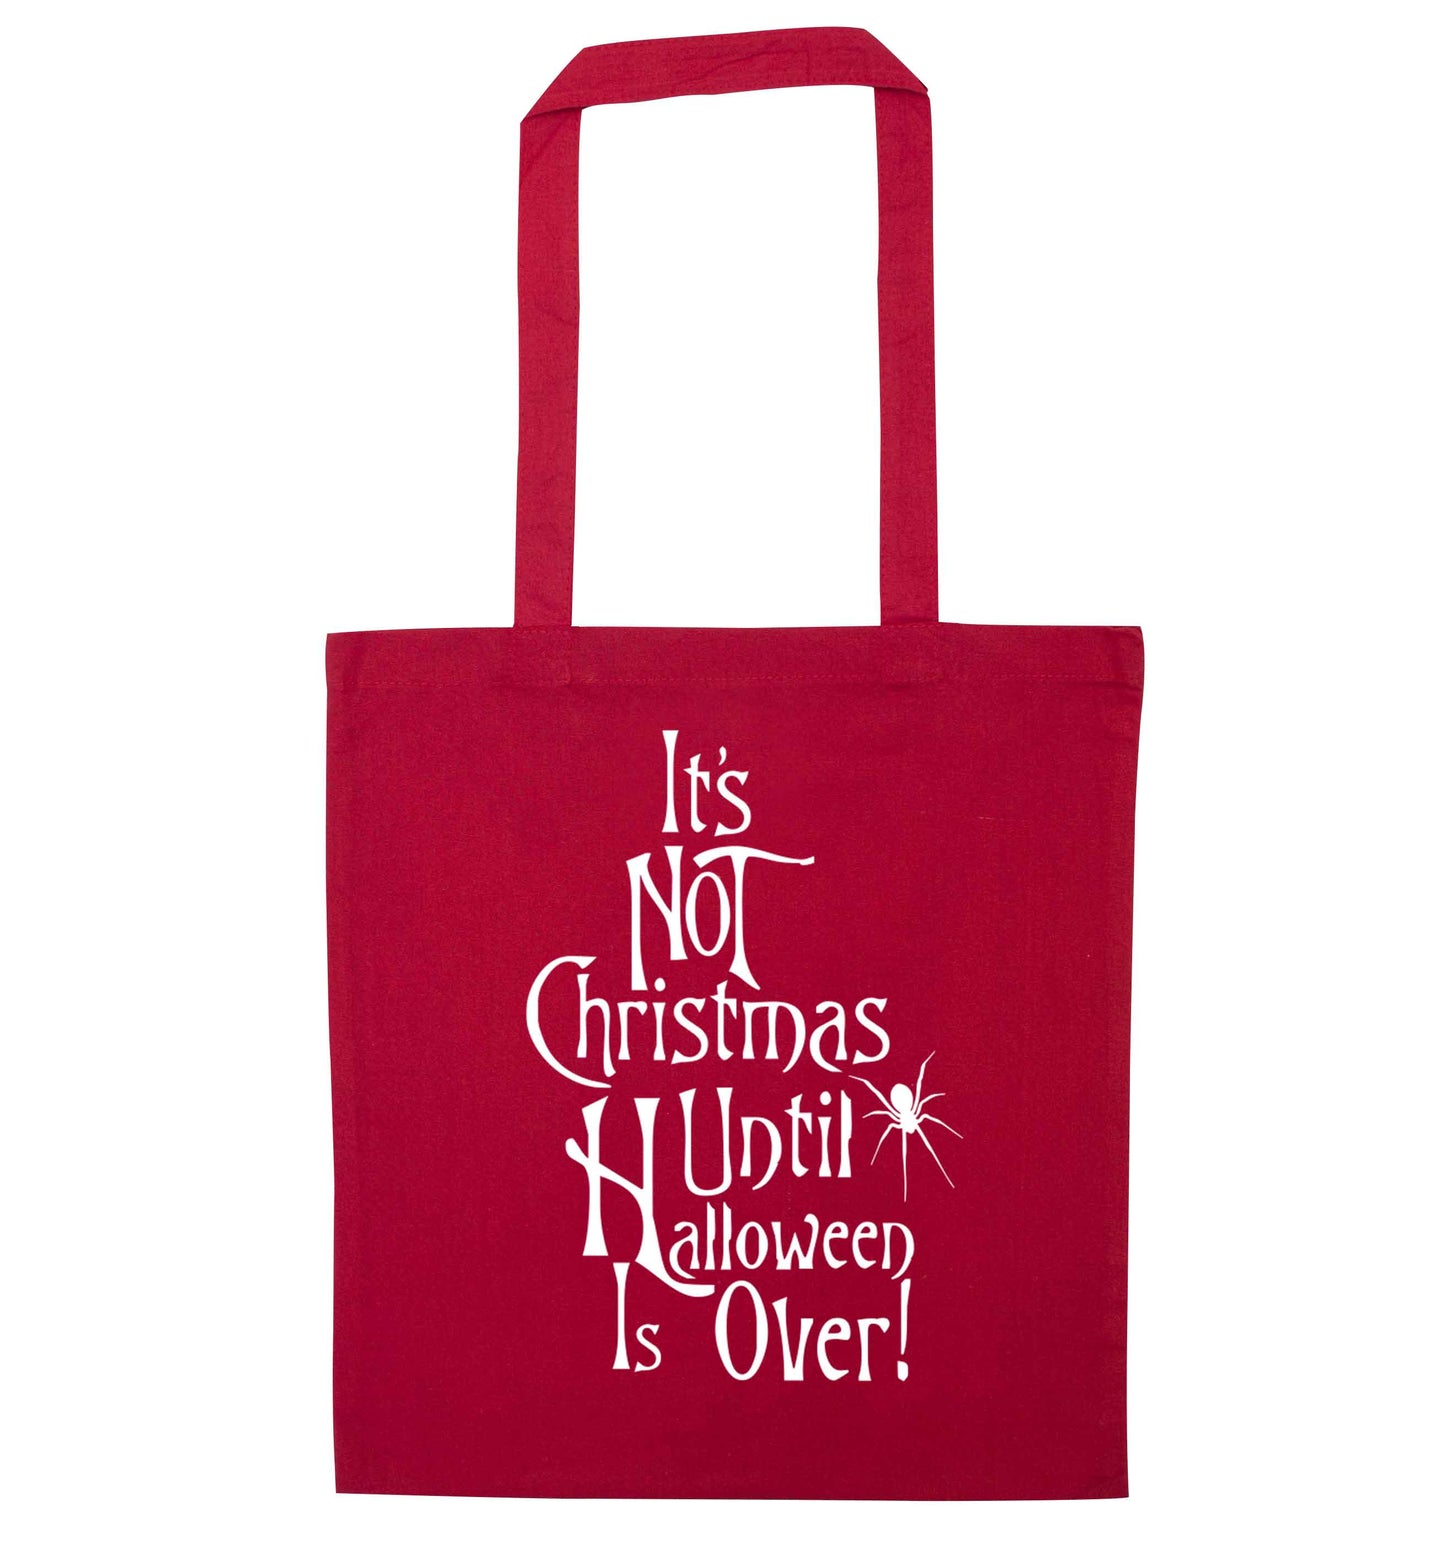 It's not Christmas until Halloween is over red tote bag